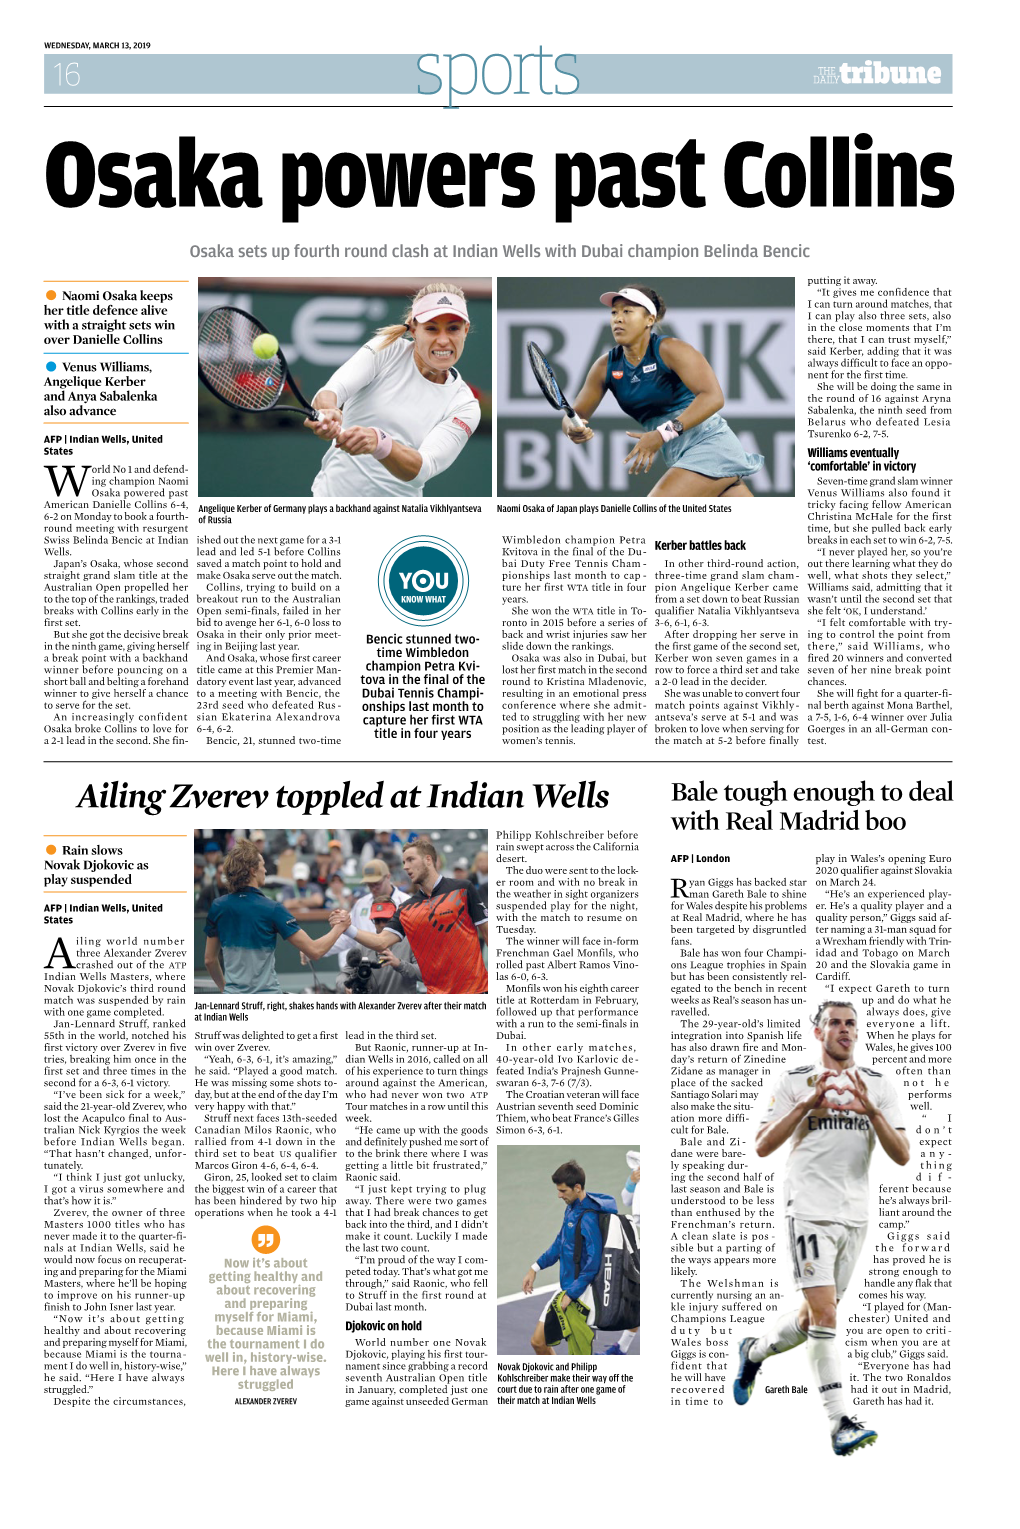 Ailing Zverev Toppled at Indian Wells Bale Tough Enough to Deal